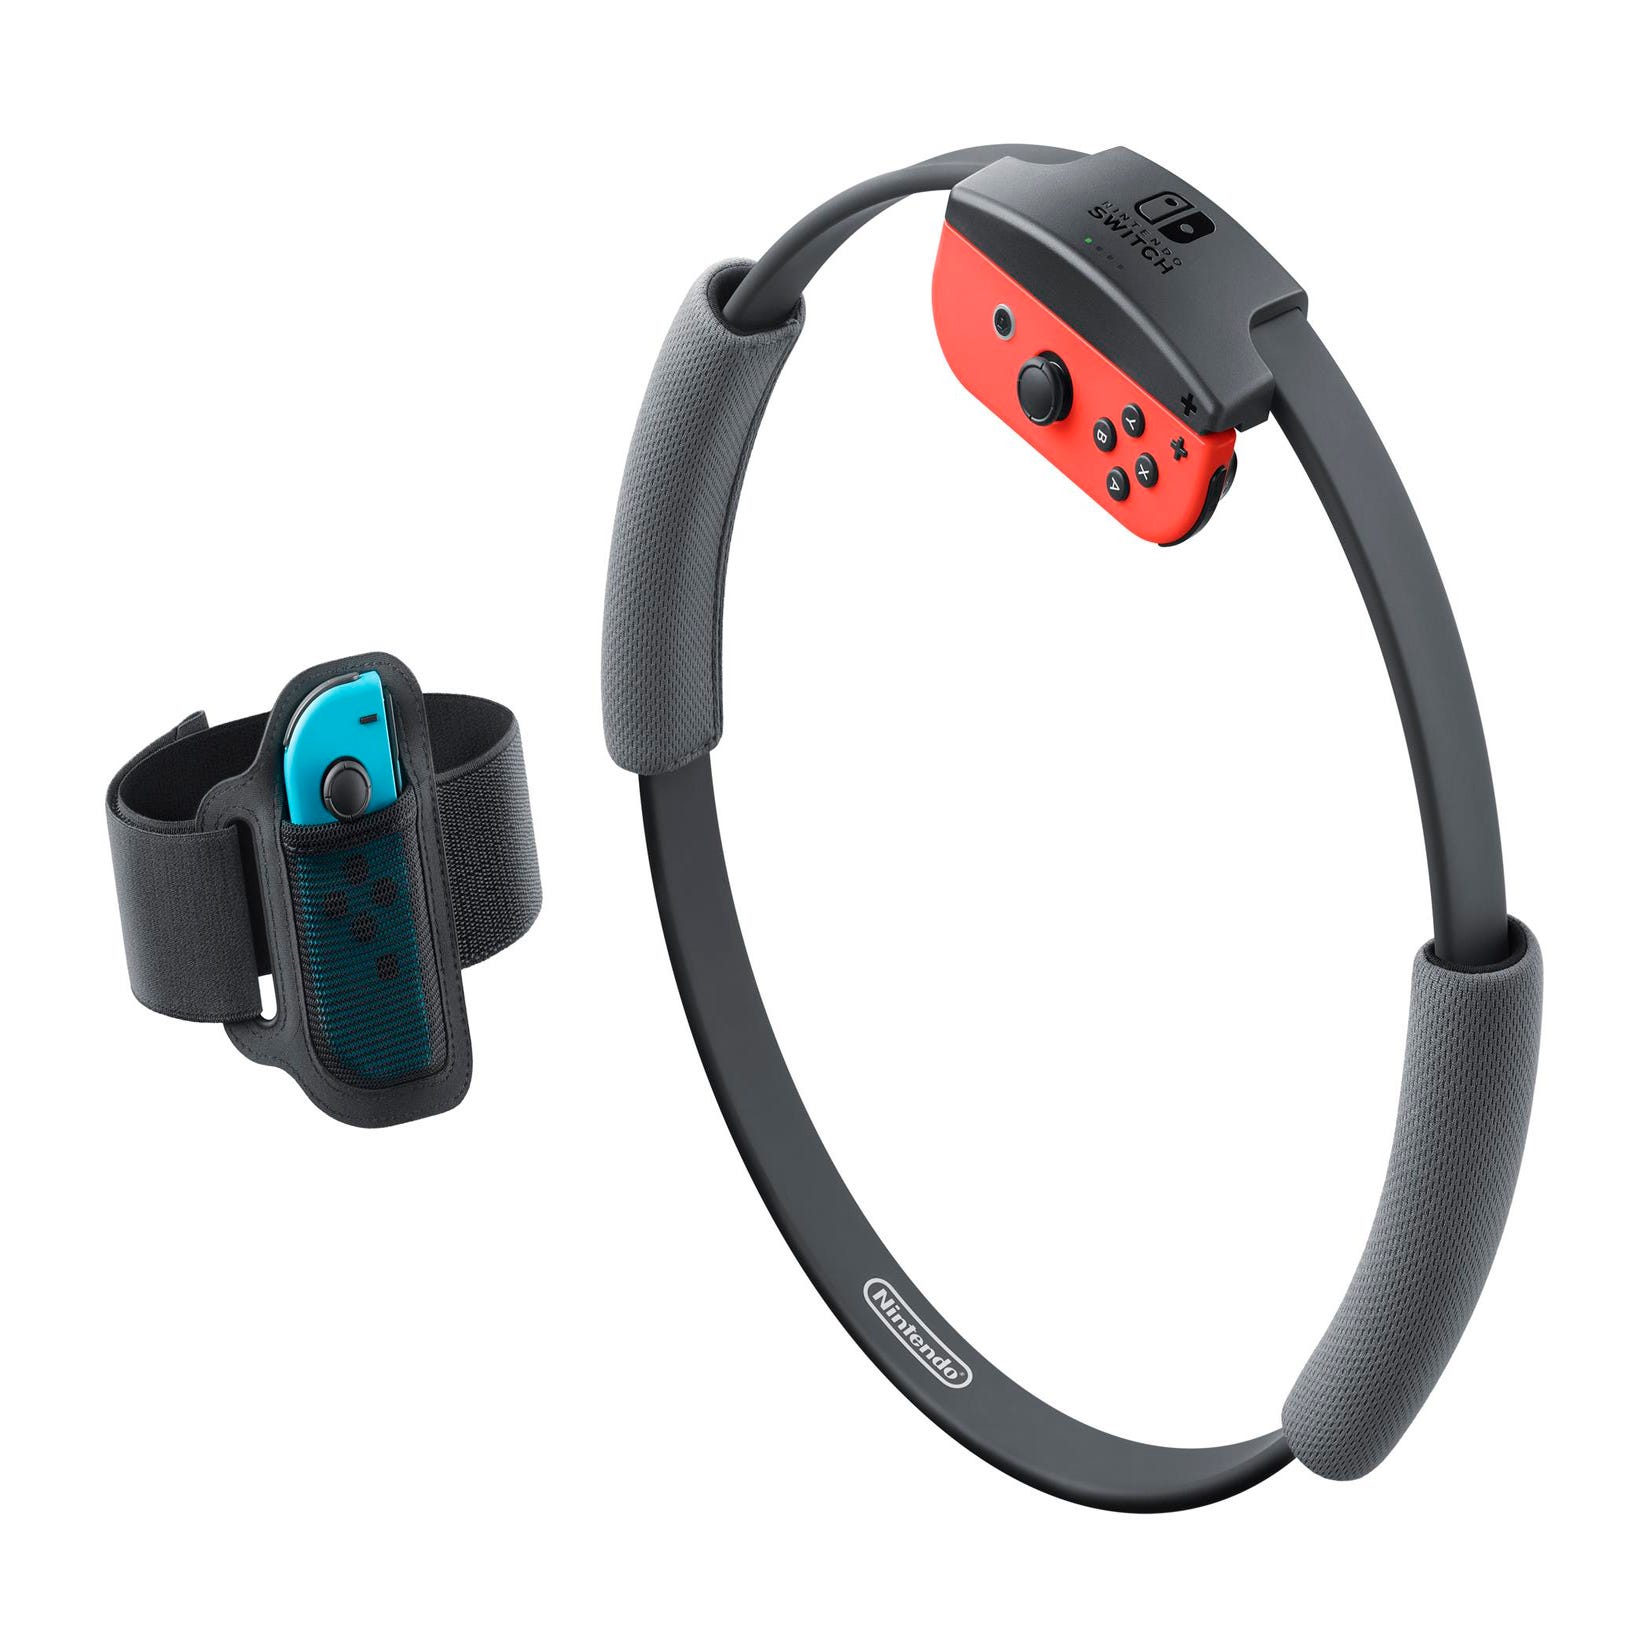 2 Pack] Leg Strap For Nintendo Switch Ring Fit Adventure, Joy-cons